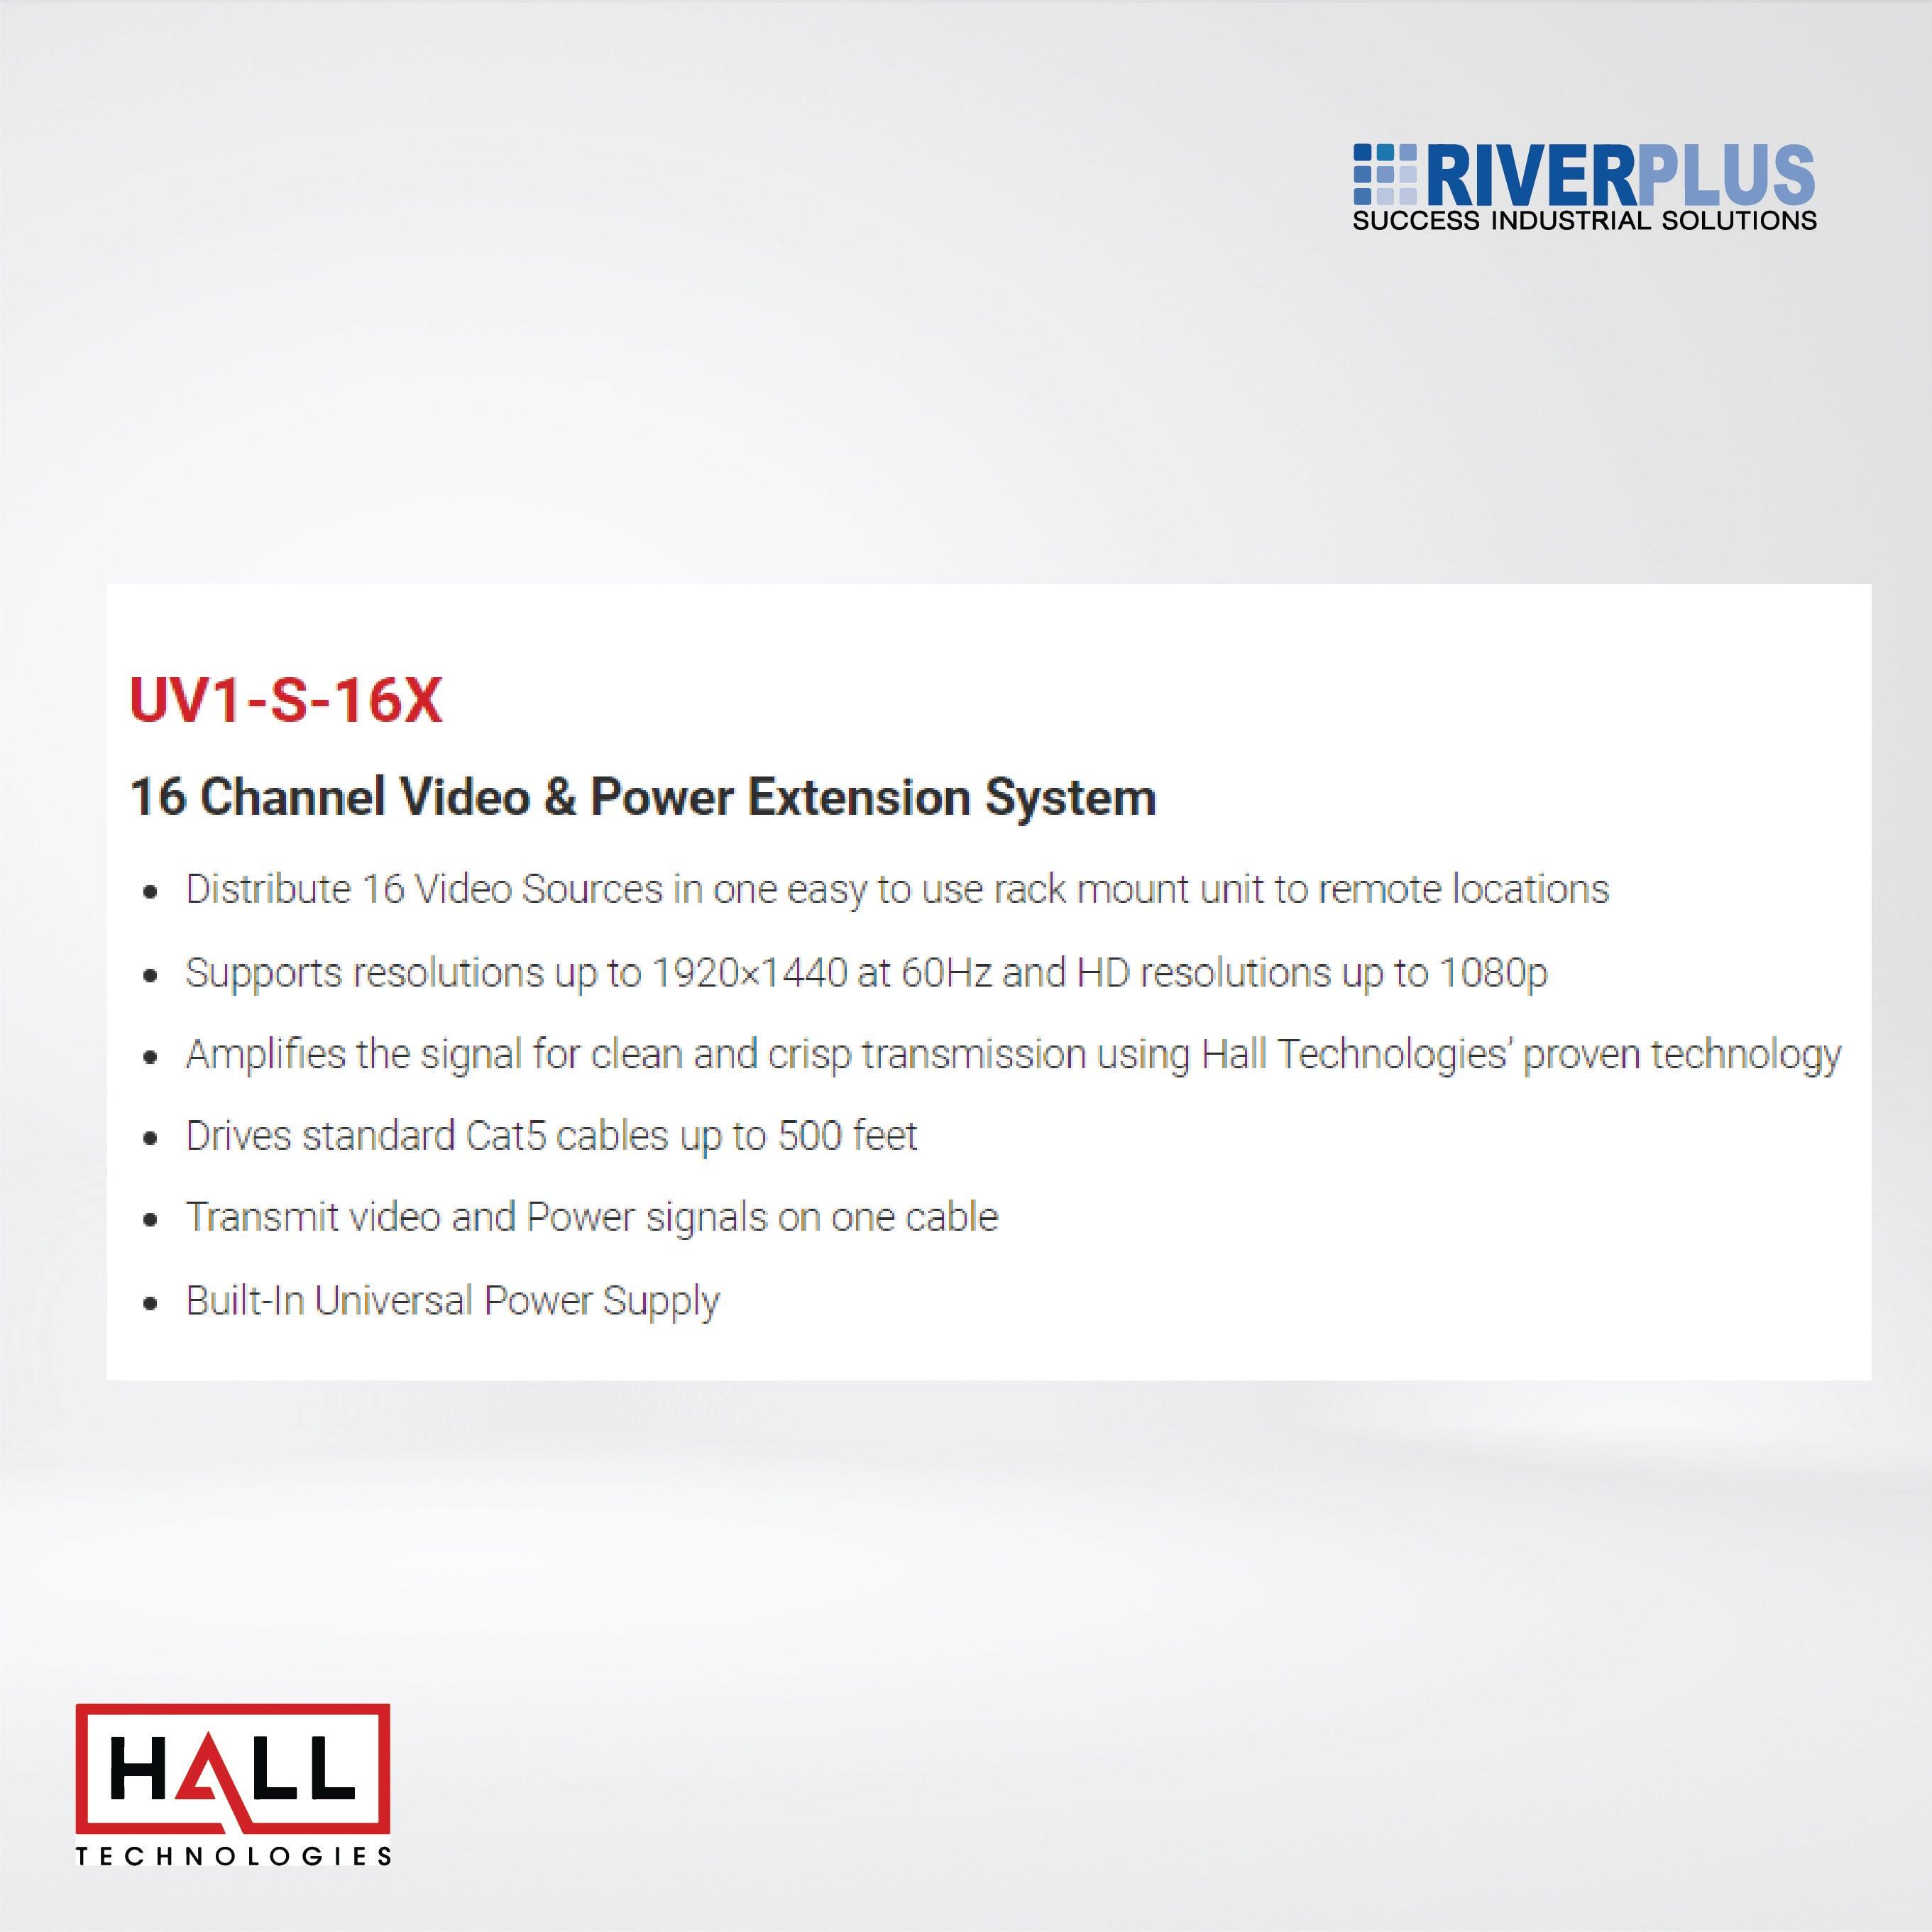 UV1-S-16X 16 Channel Video & Power Extension System - Riverplus